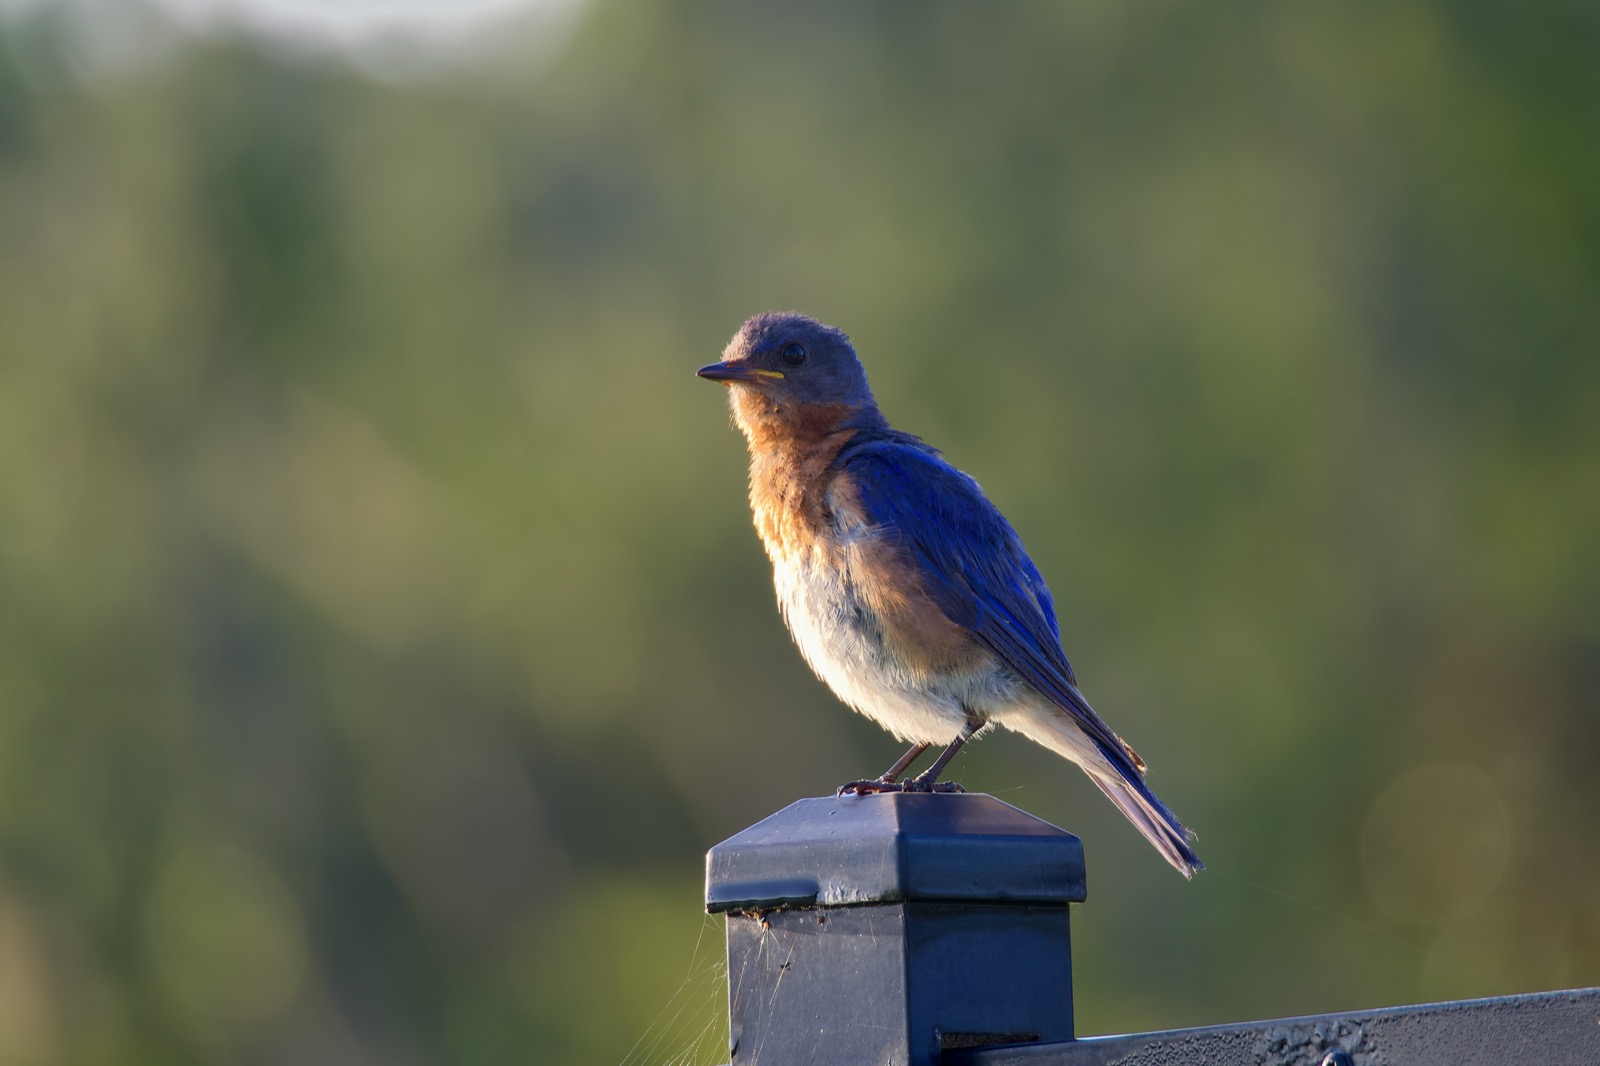 Telephoto closeup of a bludbird perched on a blue metal fence post.